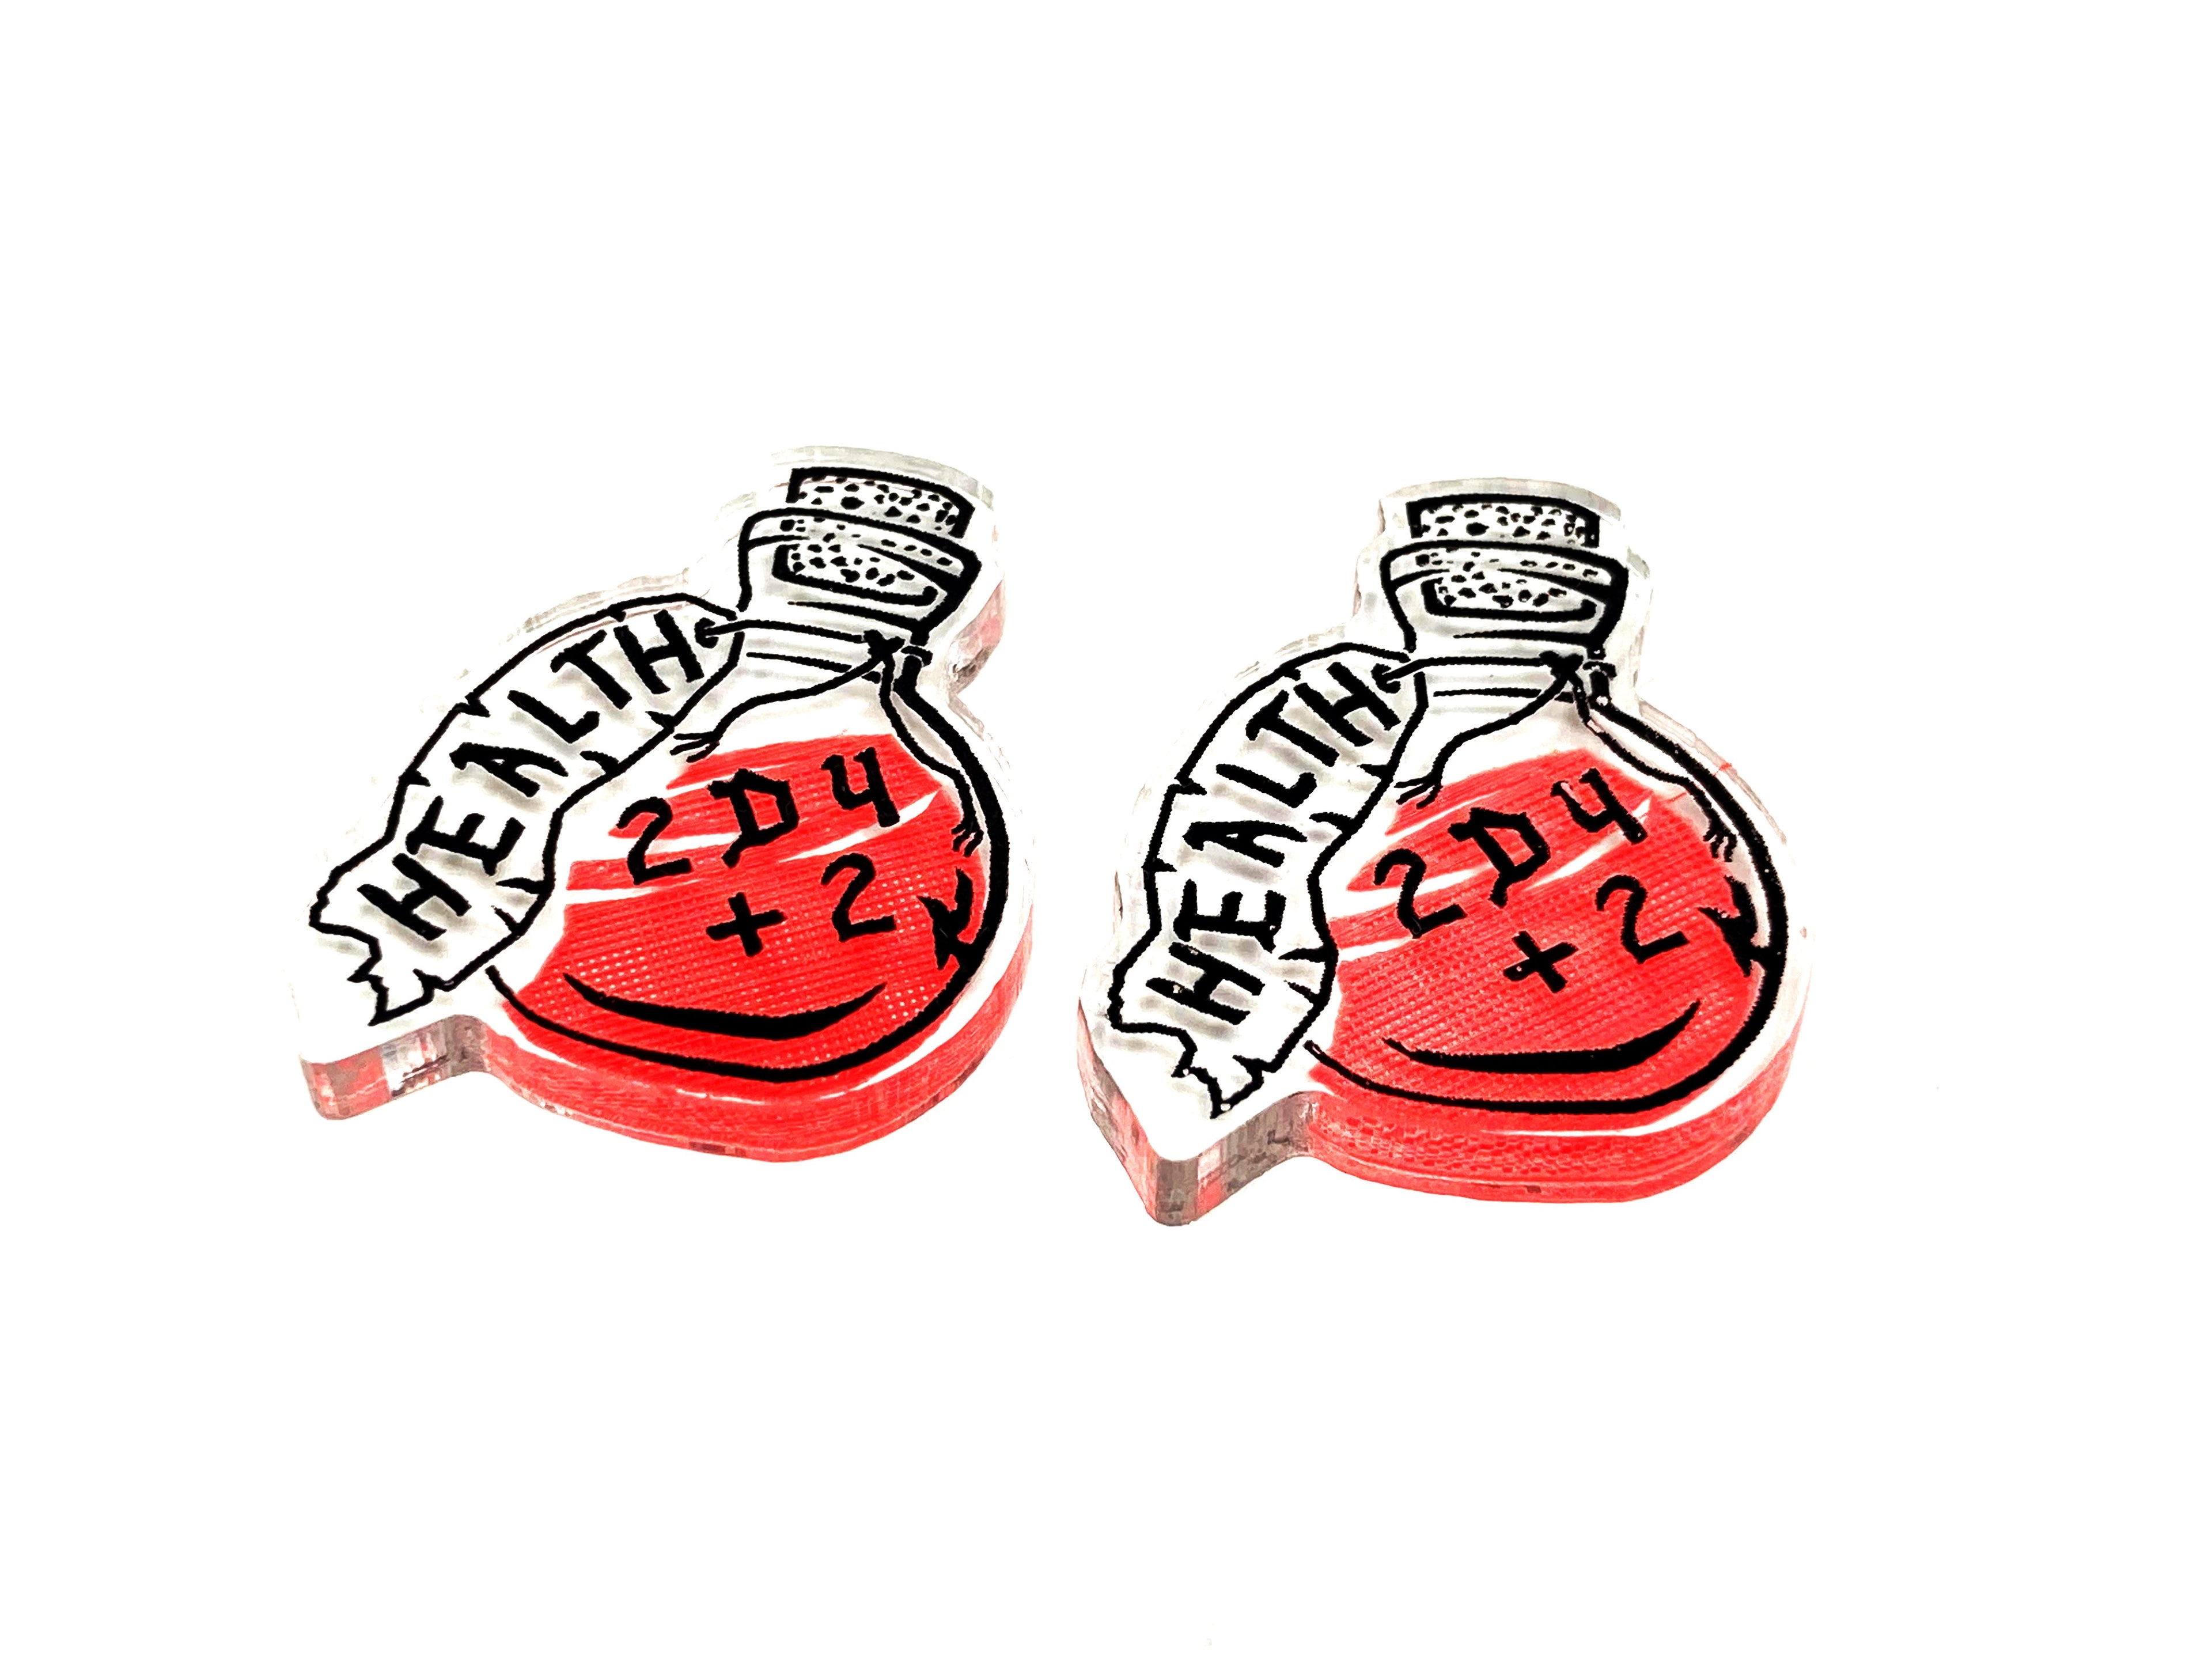 2 x Potions of Healing (double sided) for Dungeons & Dragons